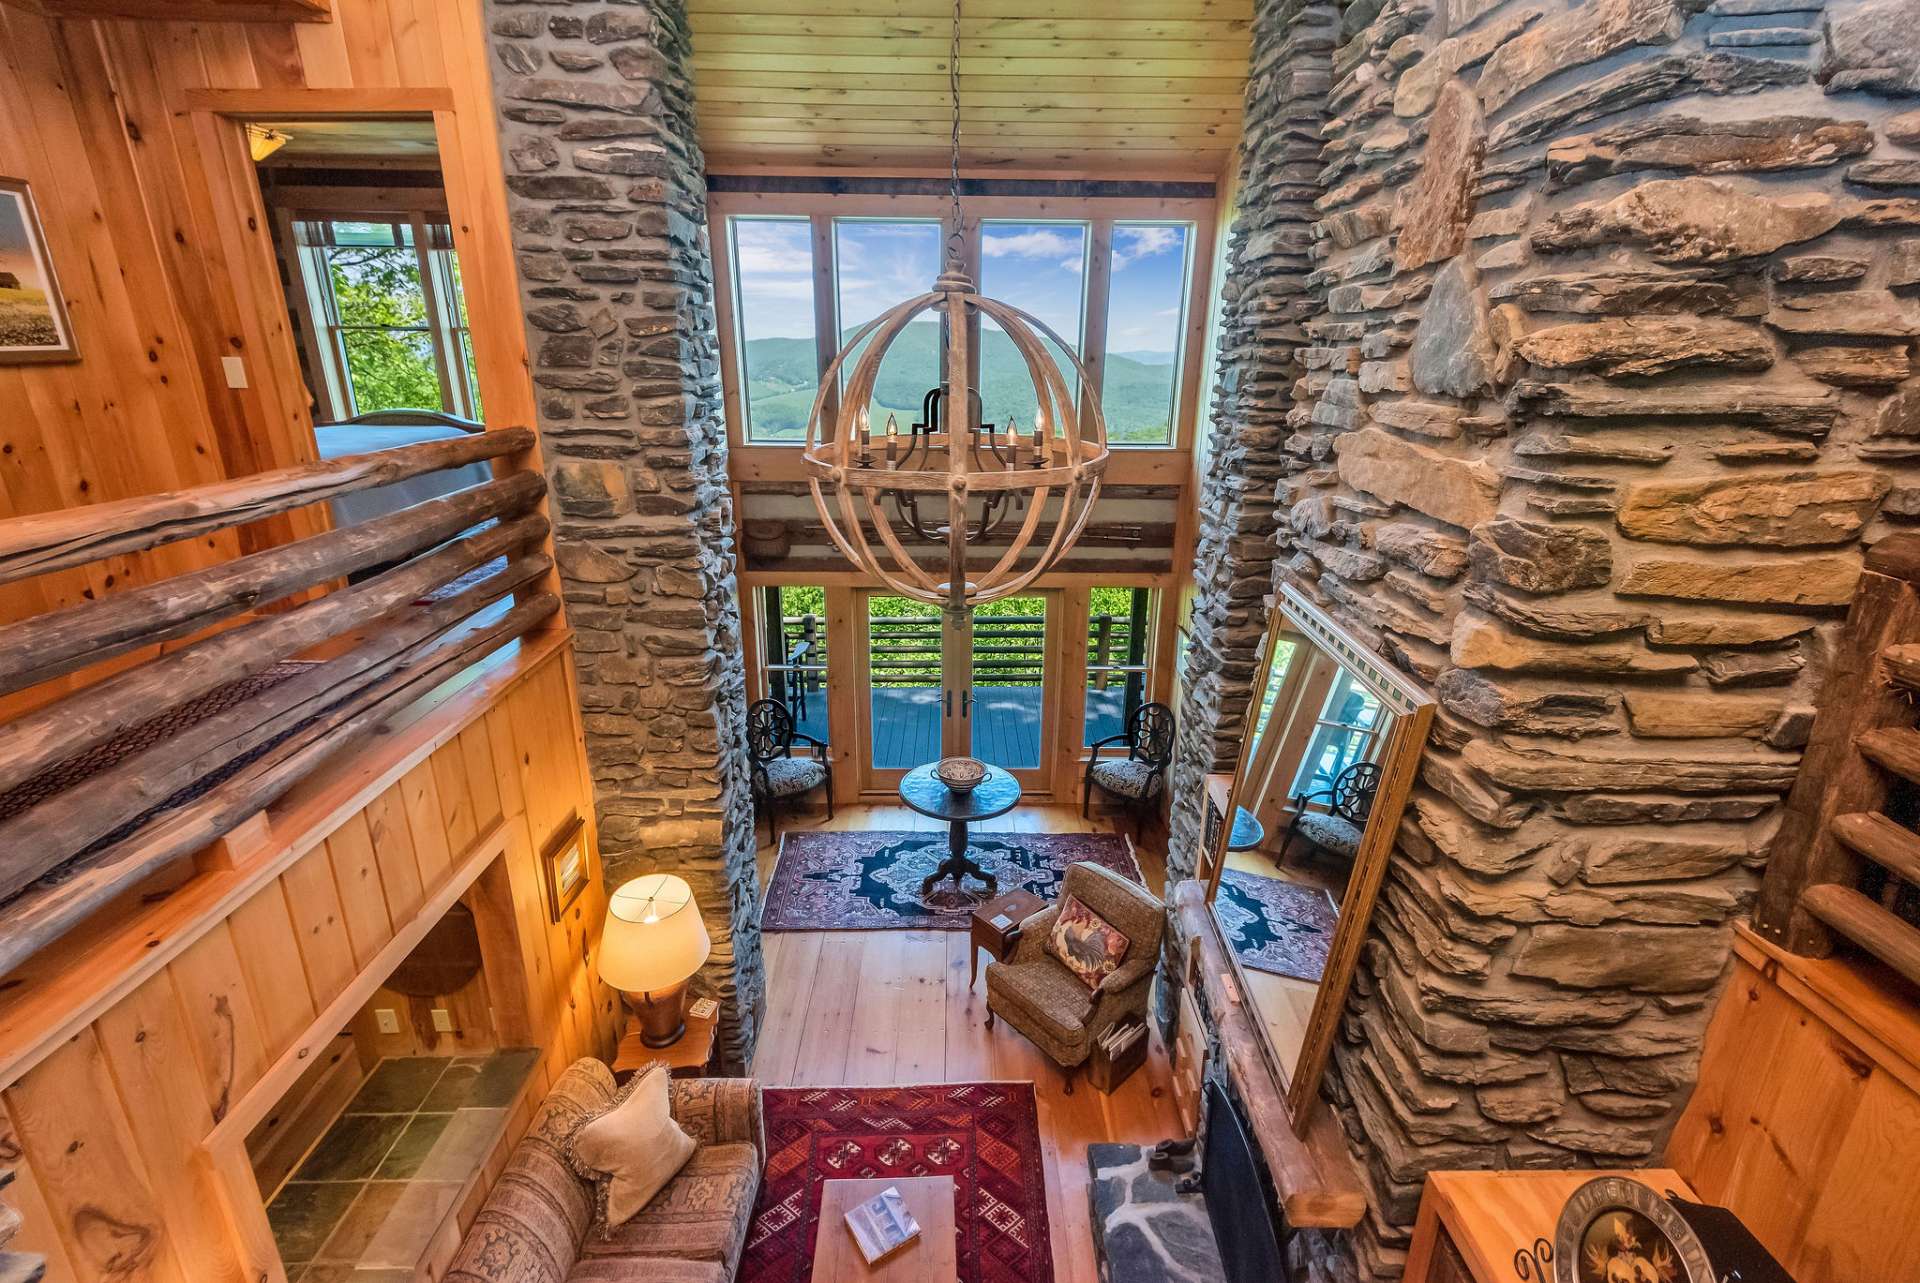 The soaring vaulted ceiling and stone columns are rustic, yet elegant.